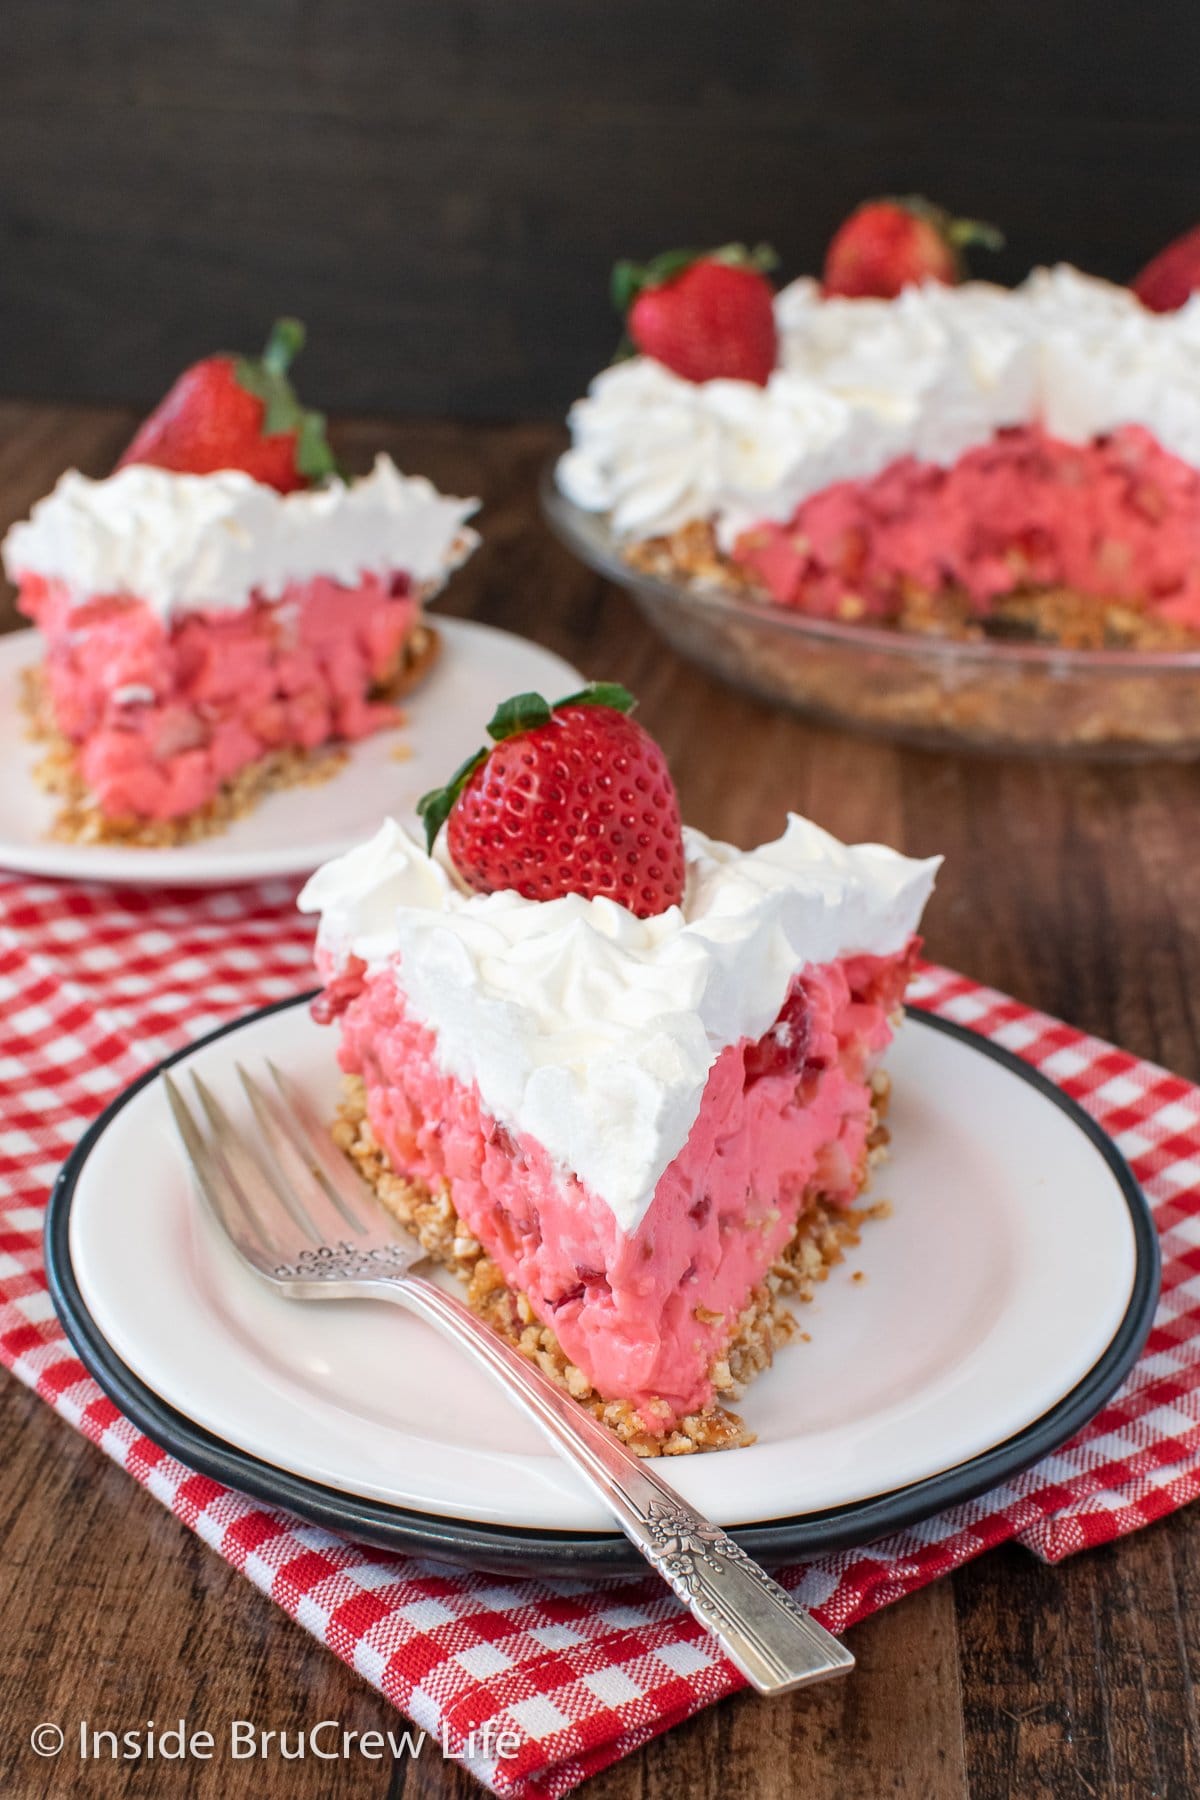 Two white plates with slices of creamy pink Jello pie on them.